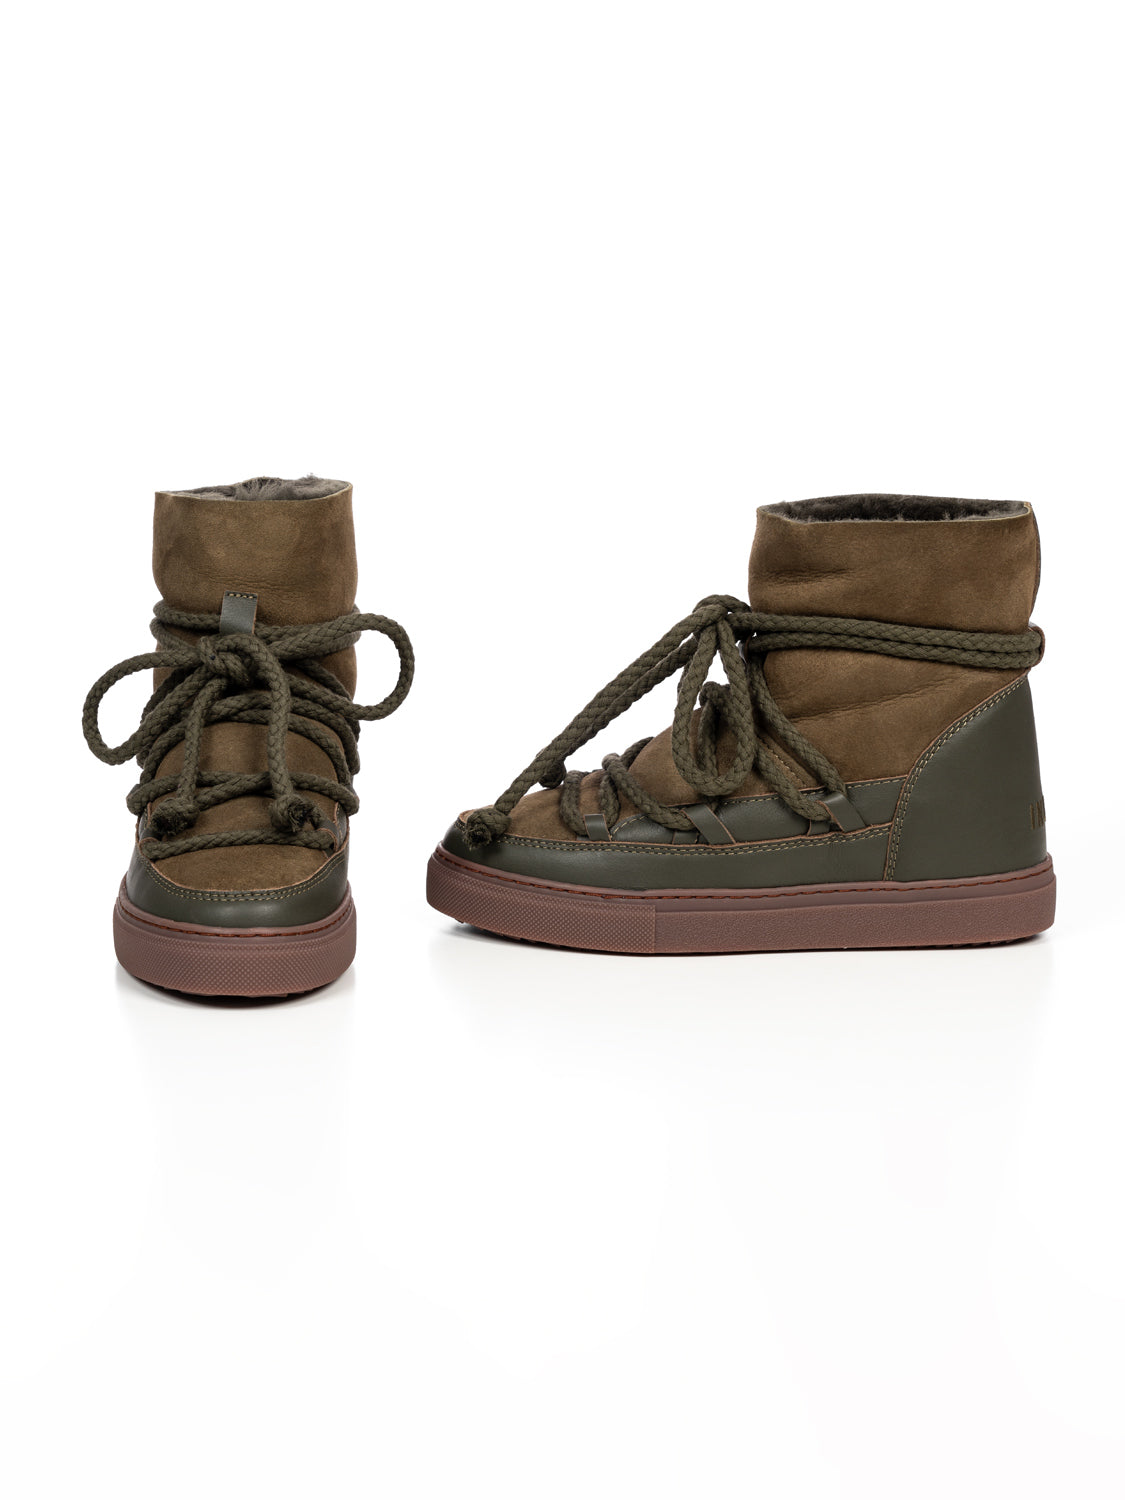 Patchwork Boots Olive